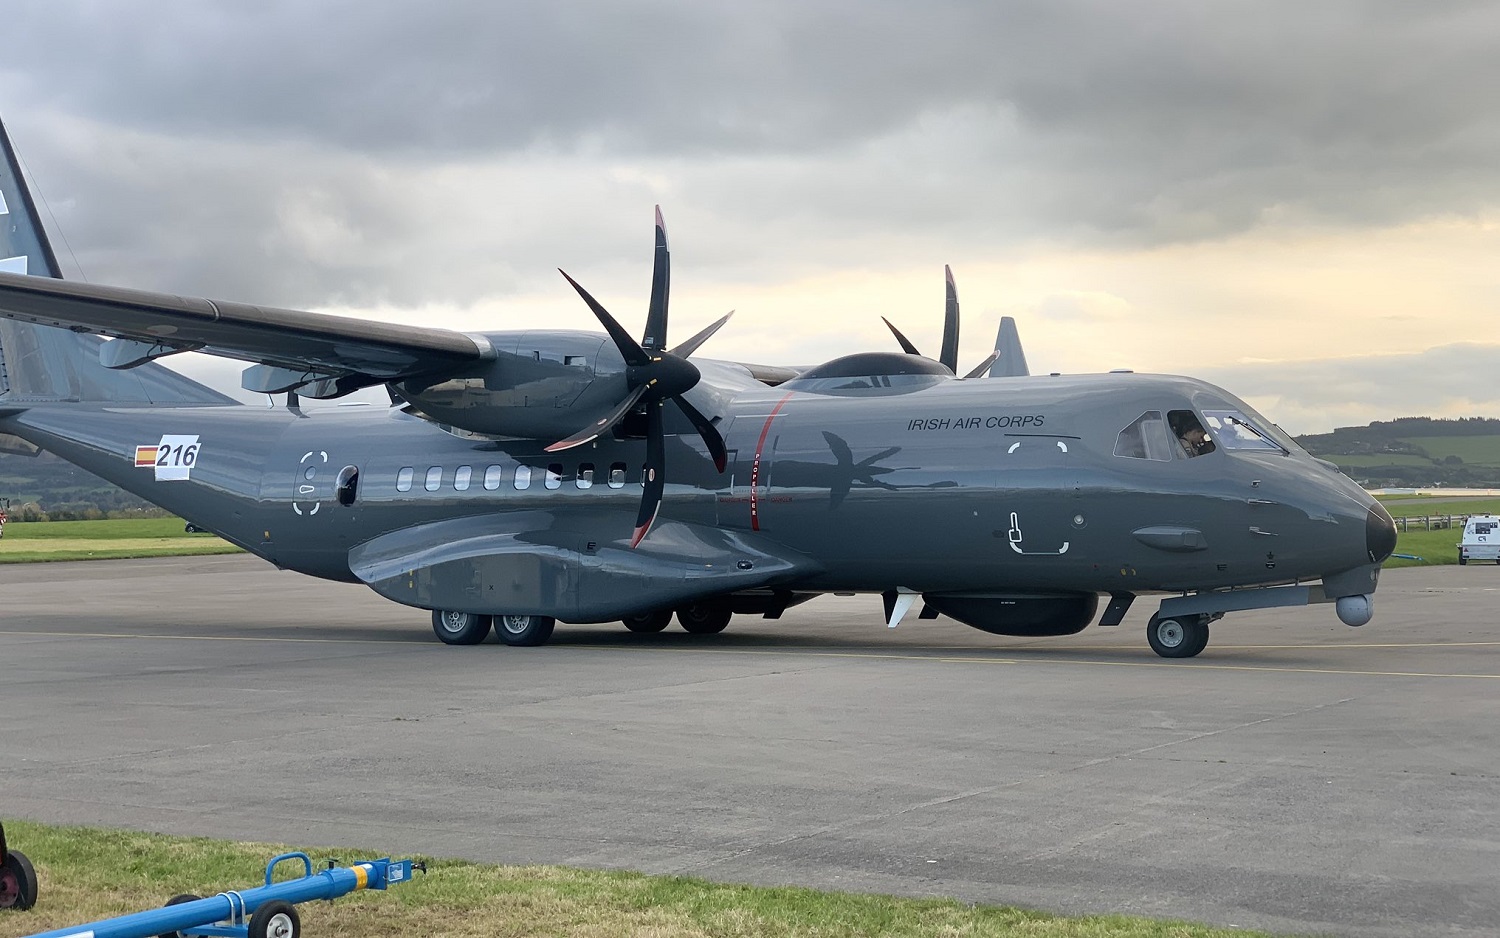 Airbus Delivers Second C-295 Maritime Patrol Aircraft (MPA) to Irish Air Corps